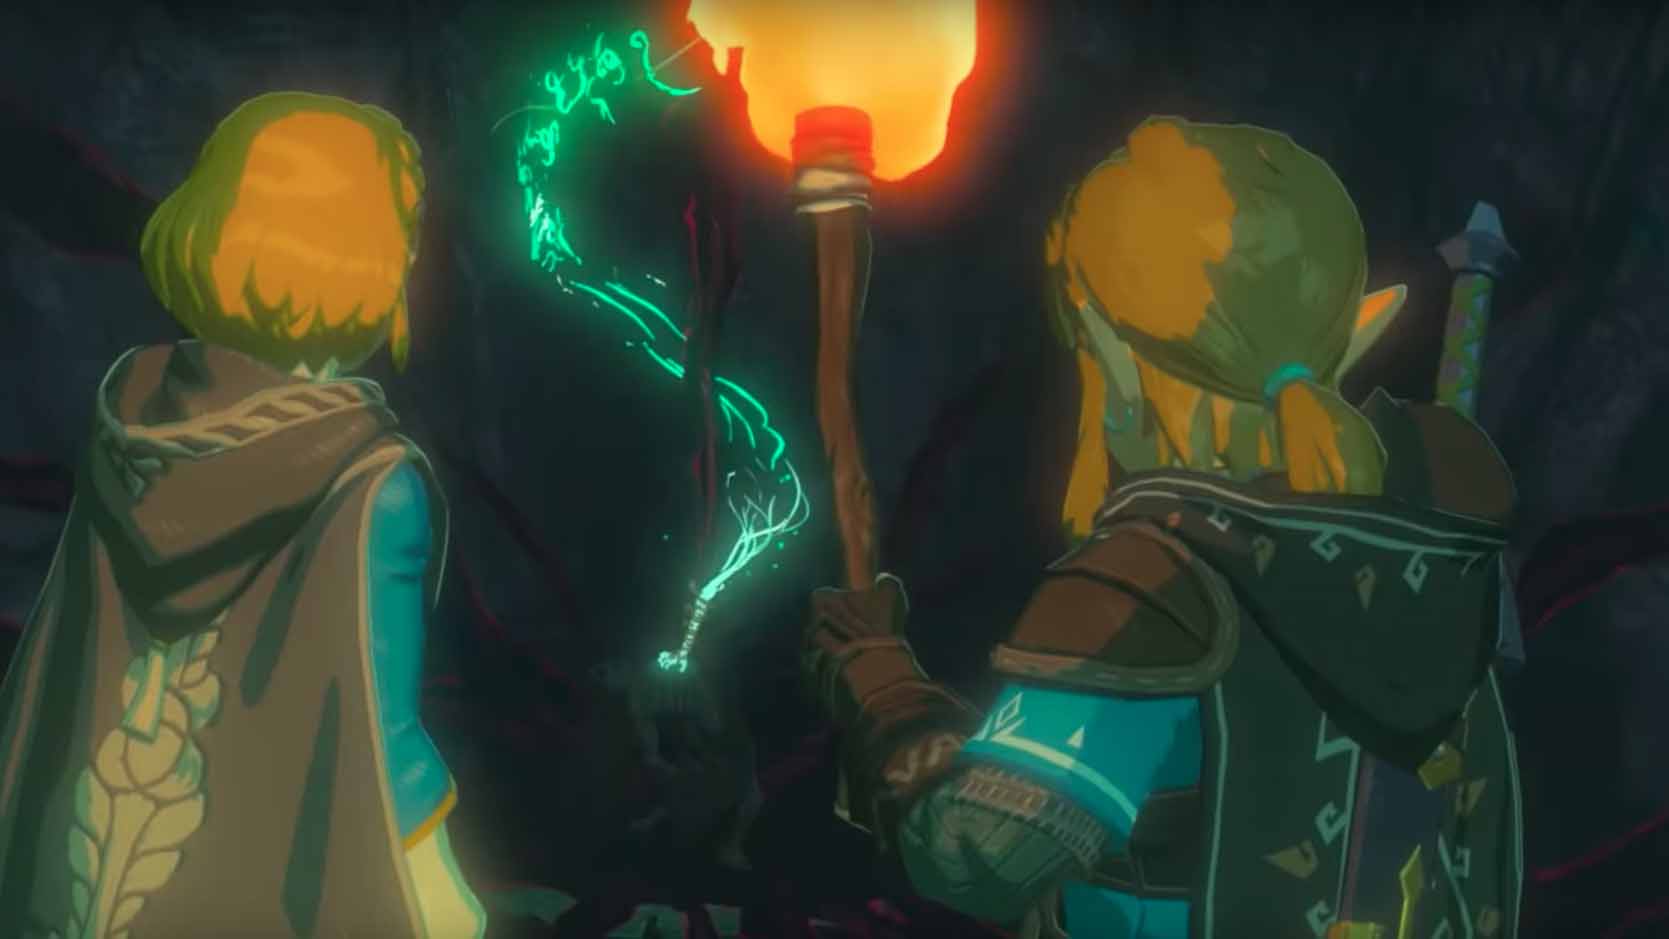 Breath of the Wild 2 trailer screenshot showing Link and Zelda in a dungeon